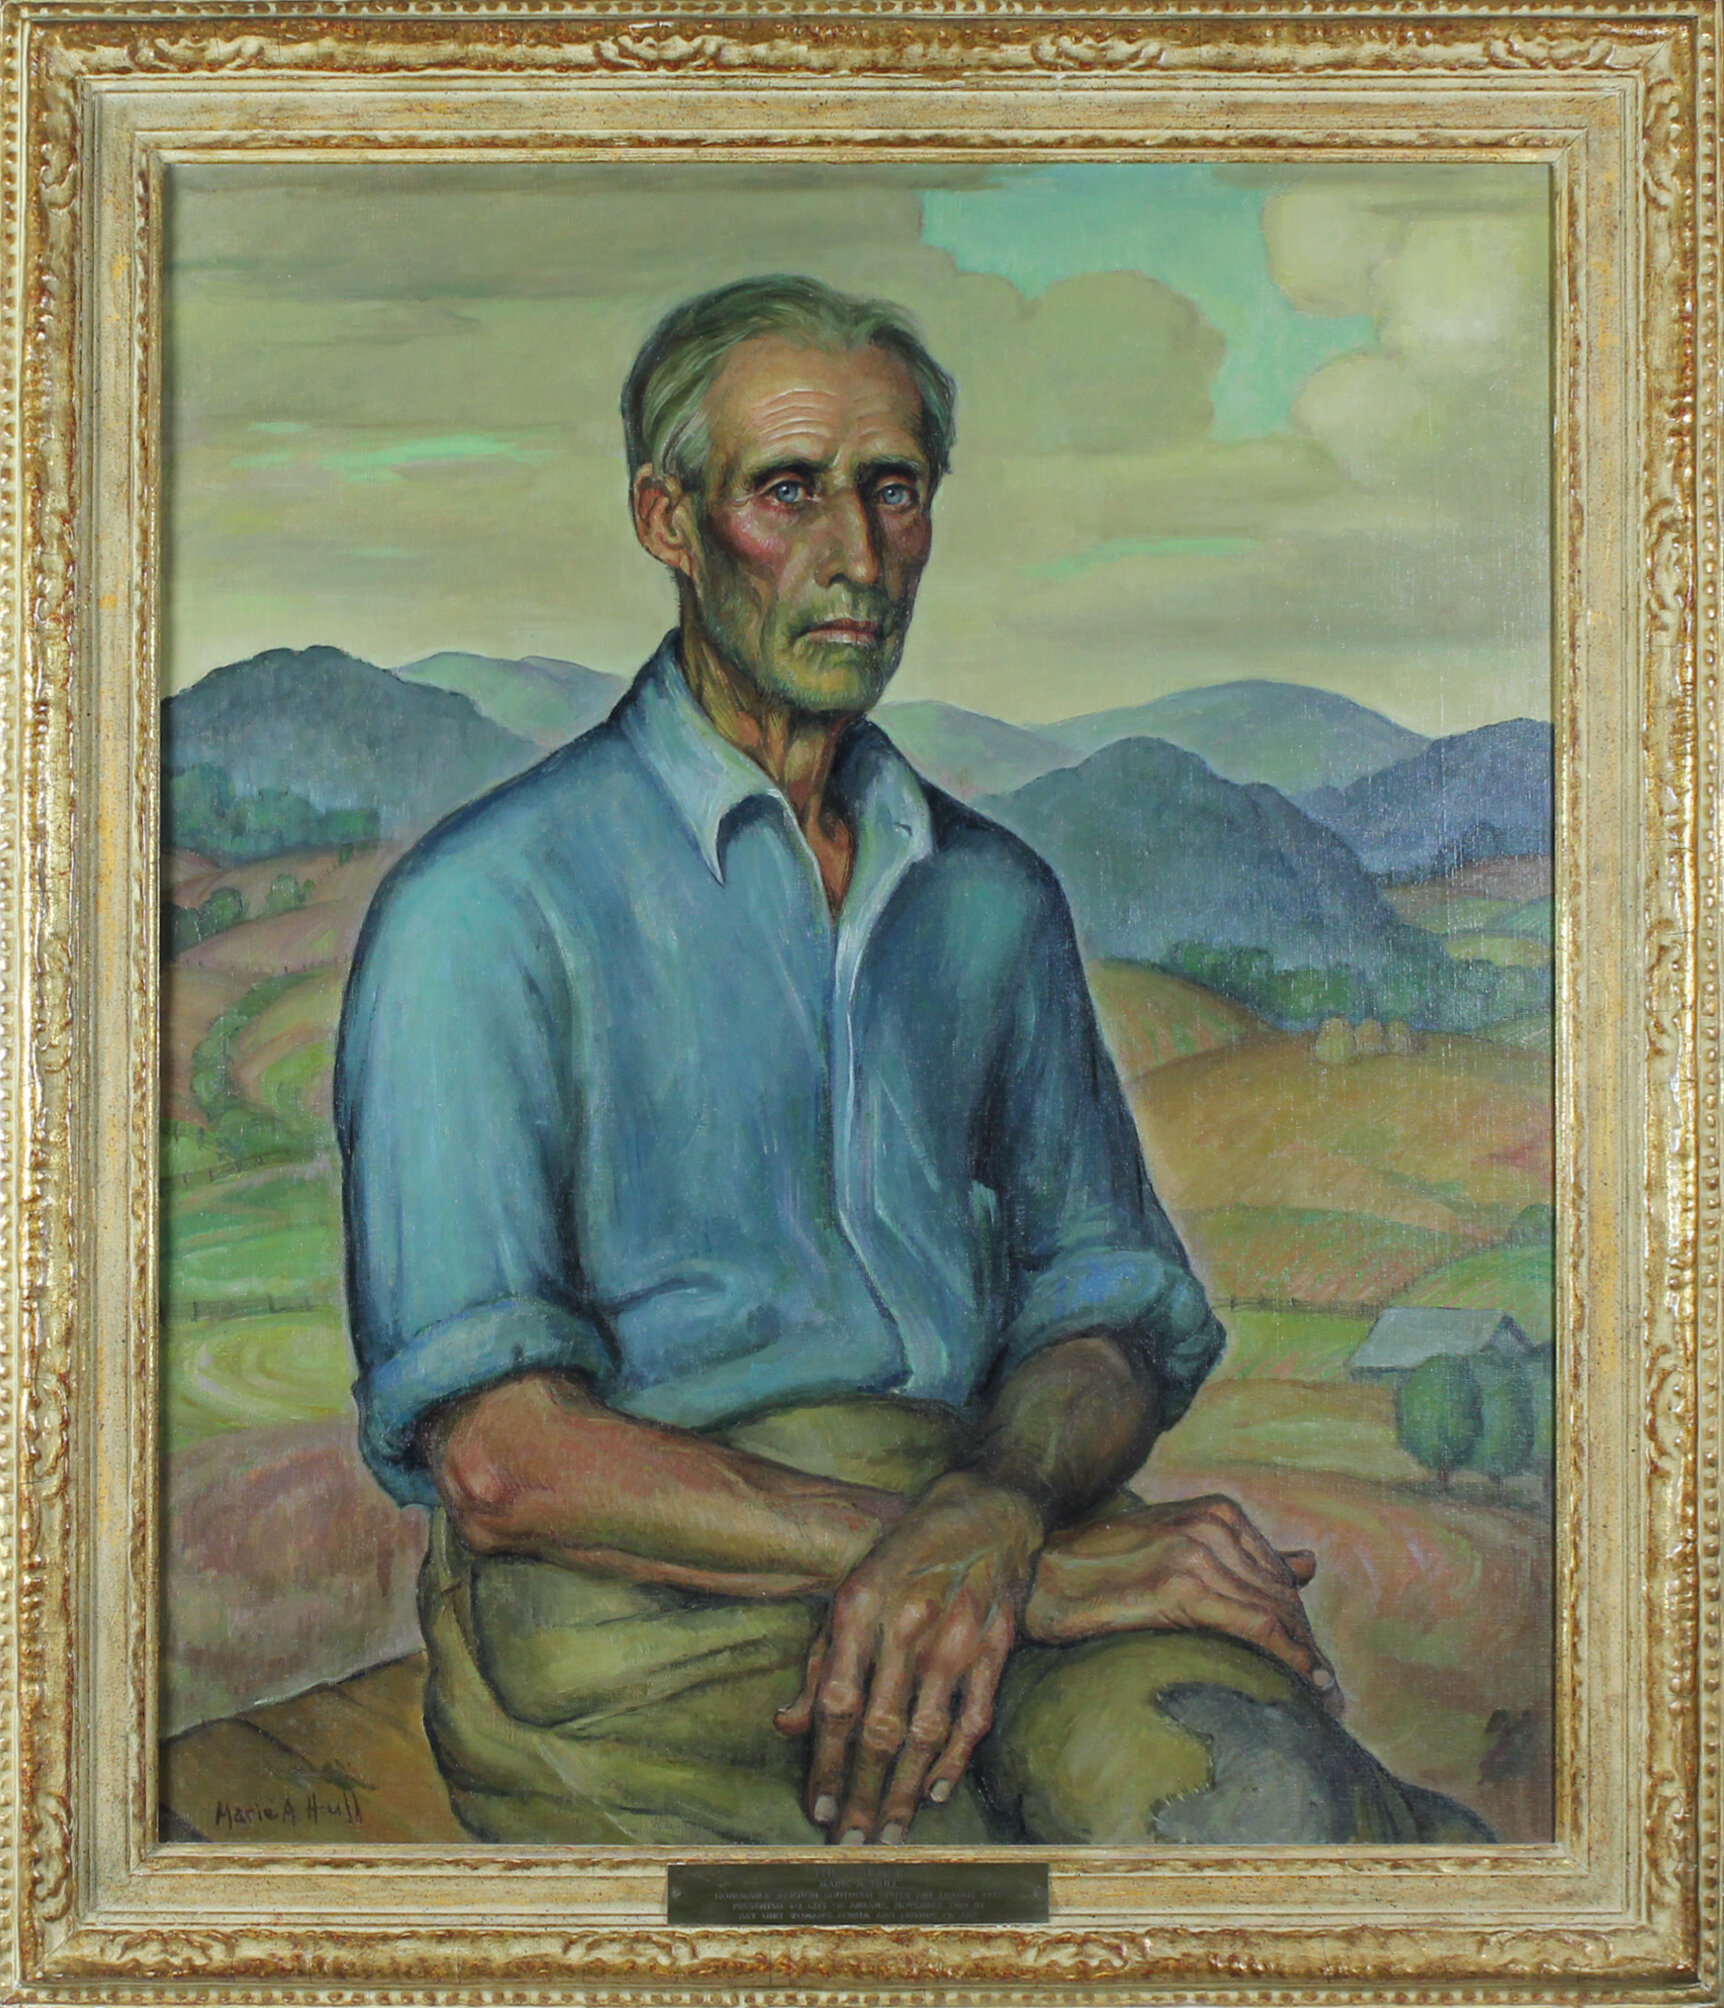 Marie A. Hull,&nbsp;The Farmer, 1937, oil on board Collection of the Abilene Museum of Fine Art (The Grace Museum), Gift of the Art Unit of the Woman's Forum and Friends of Art